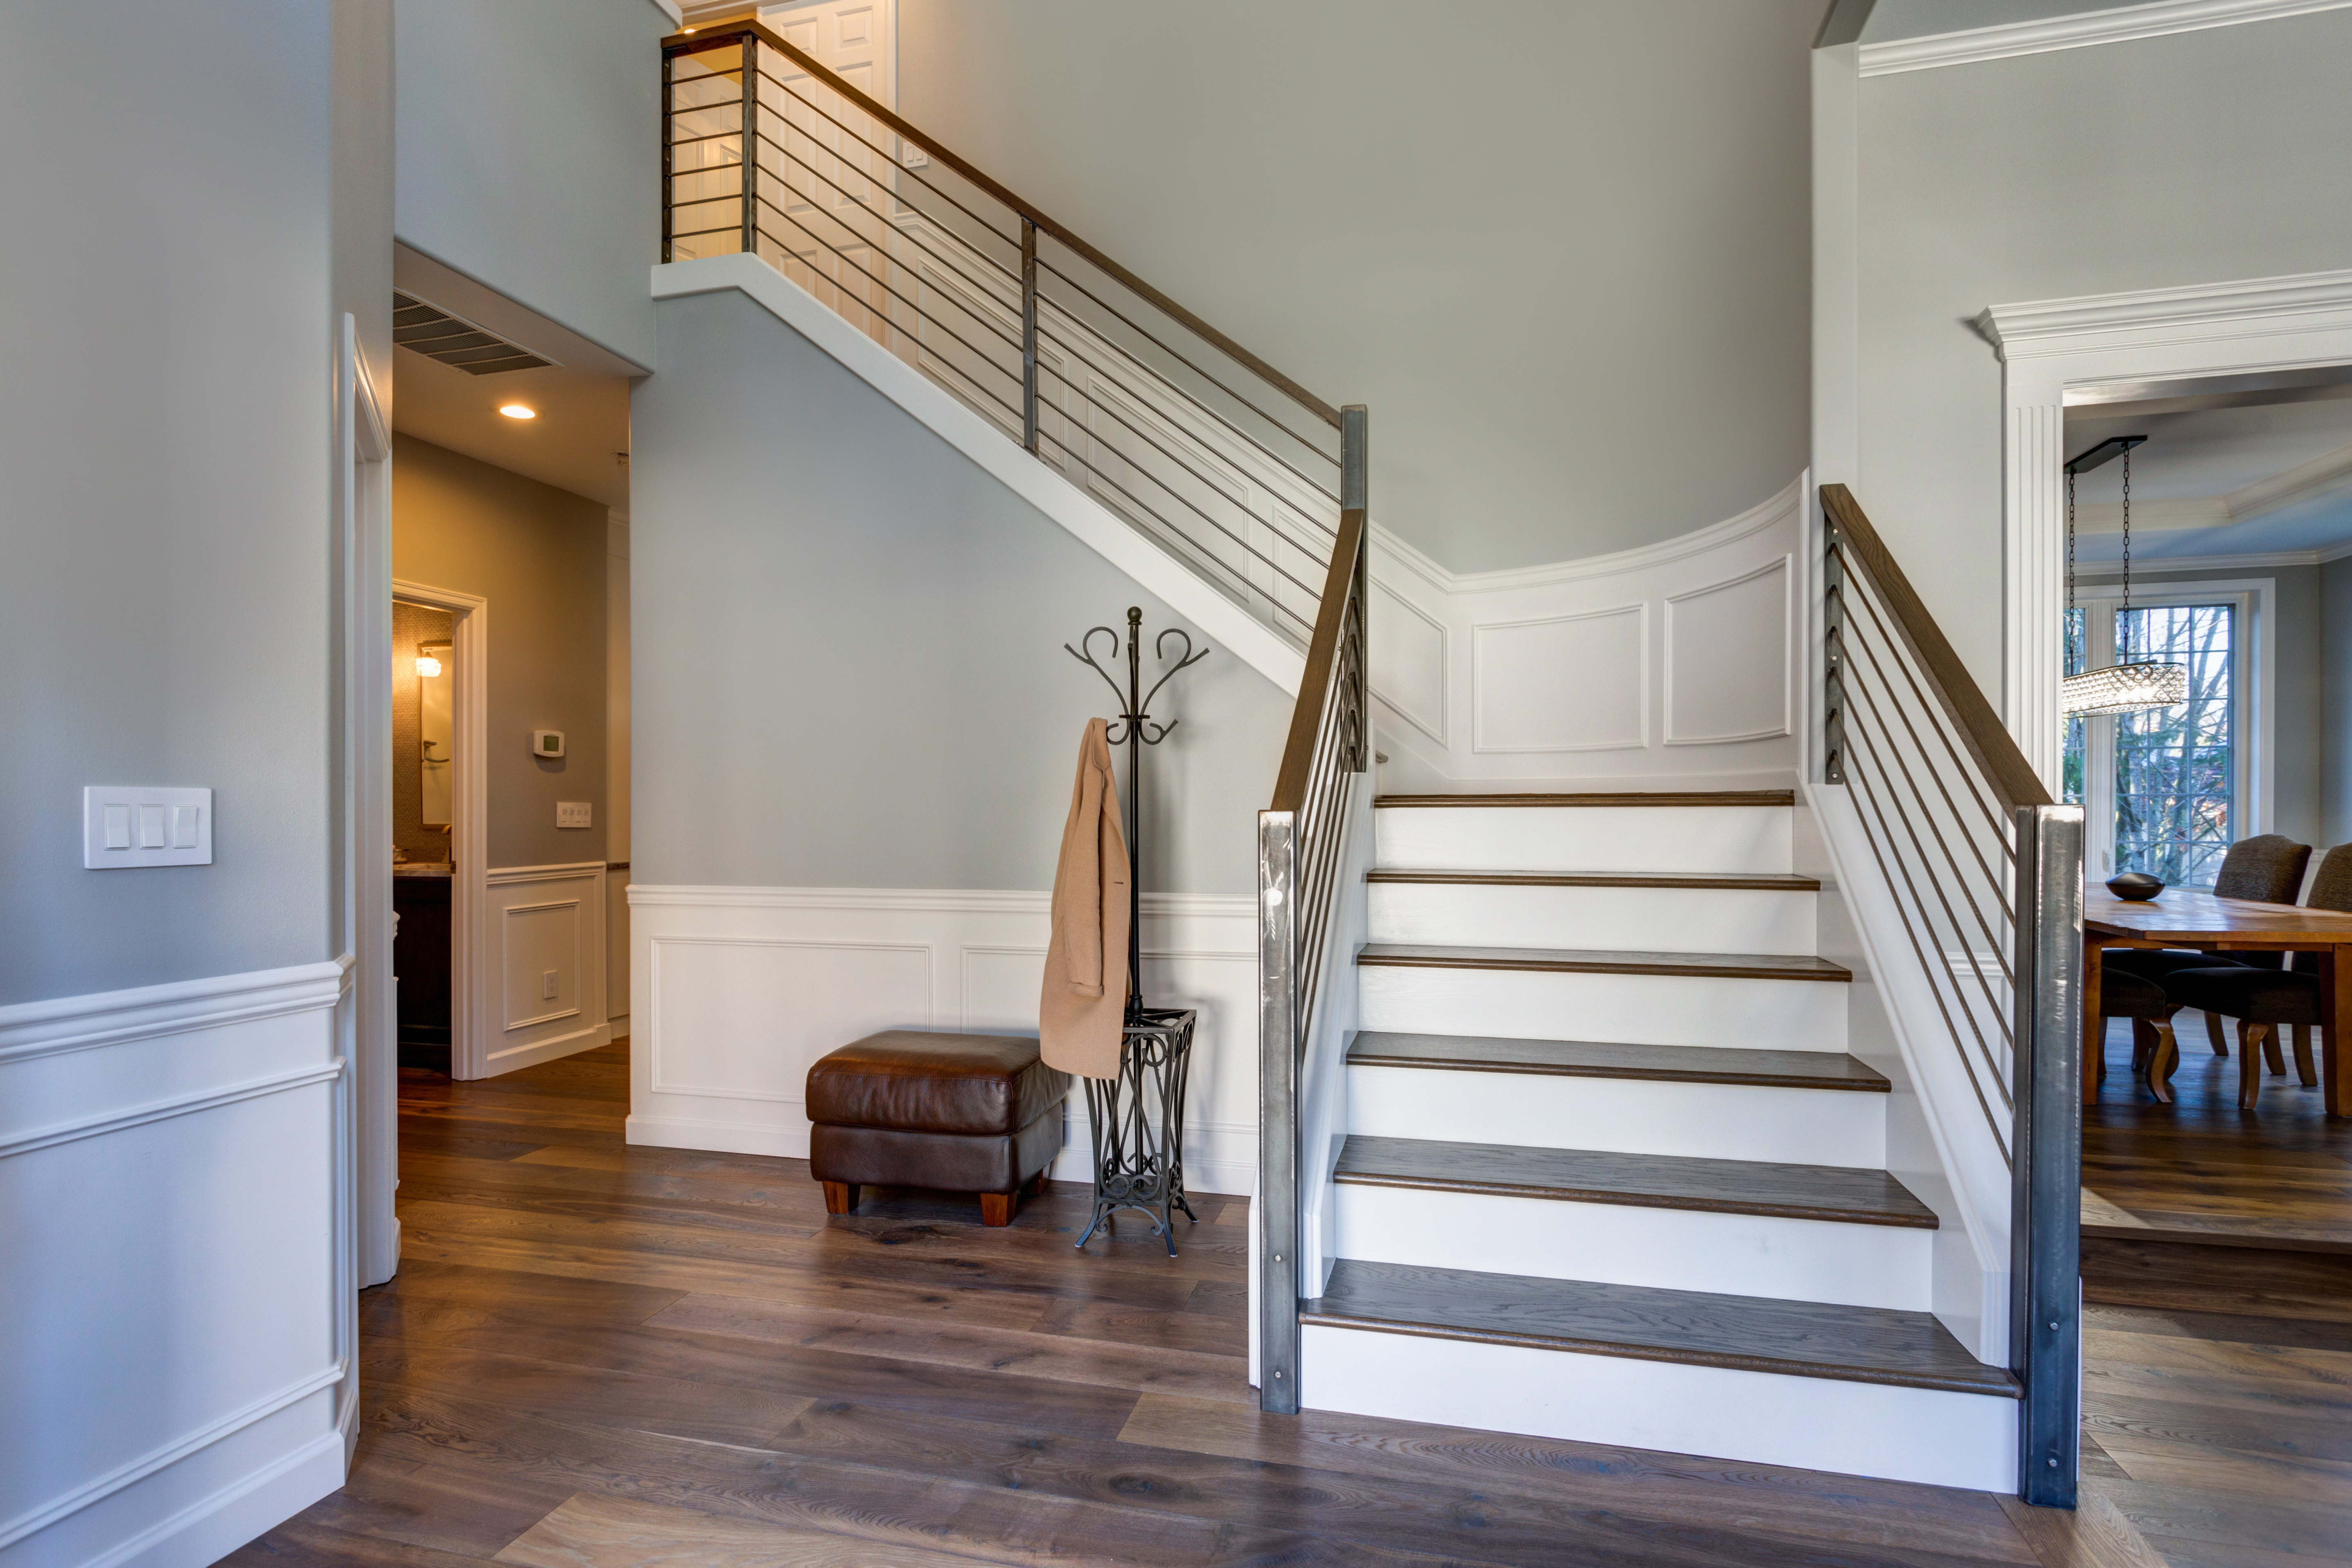 Wainscoting in a hallway